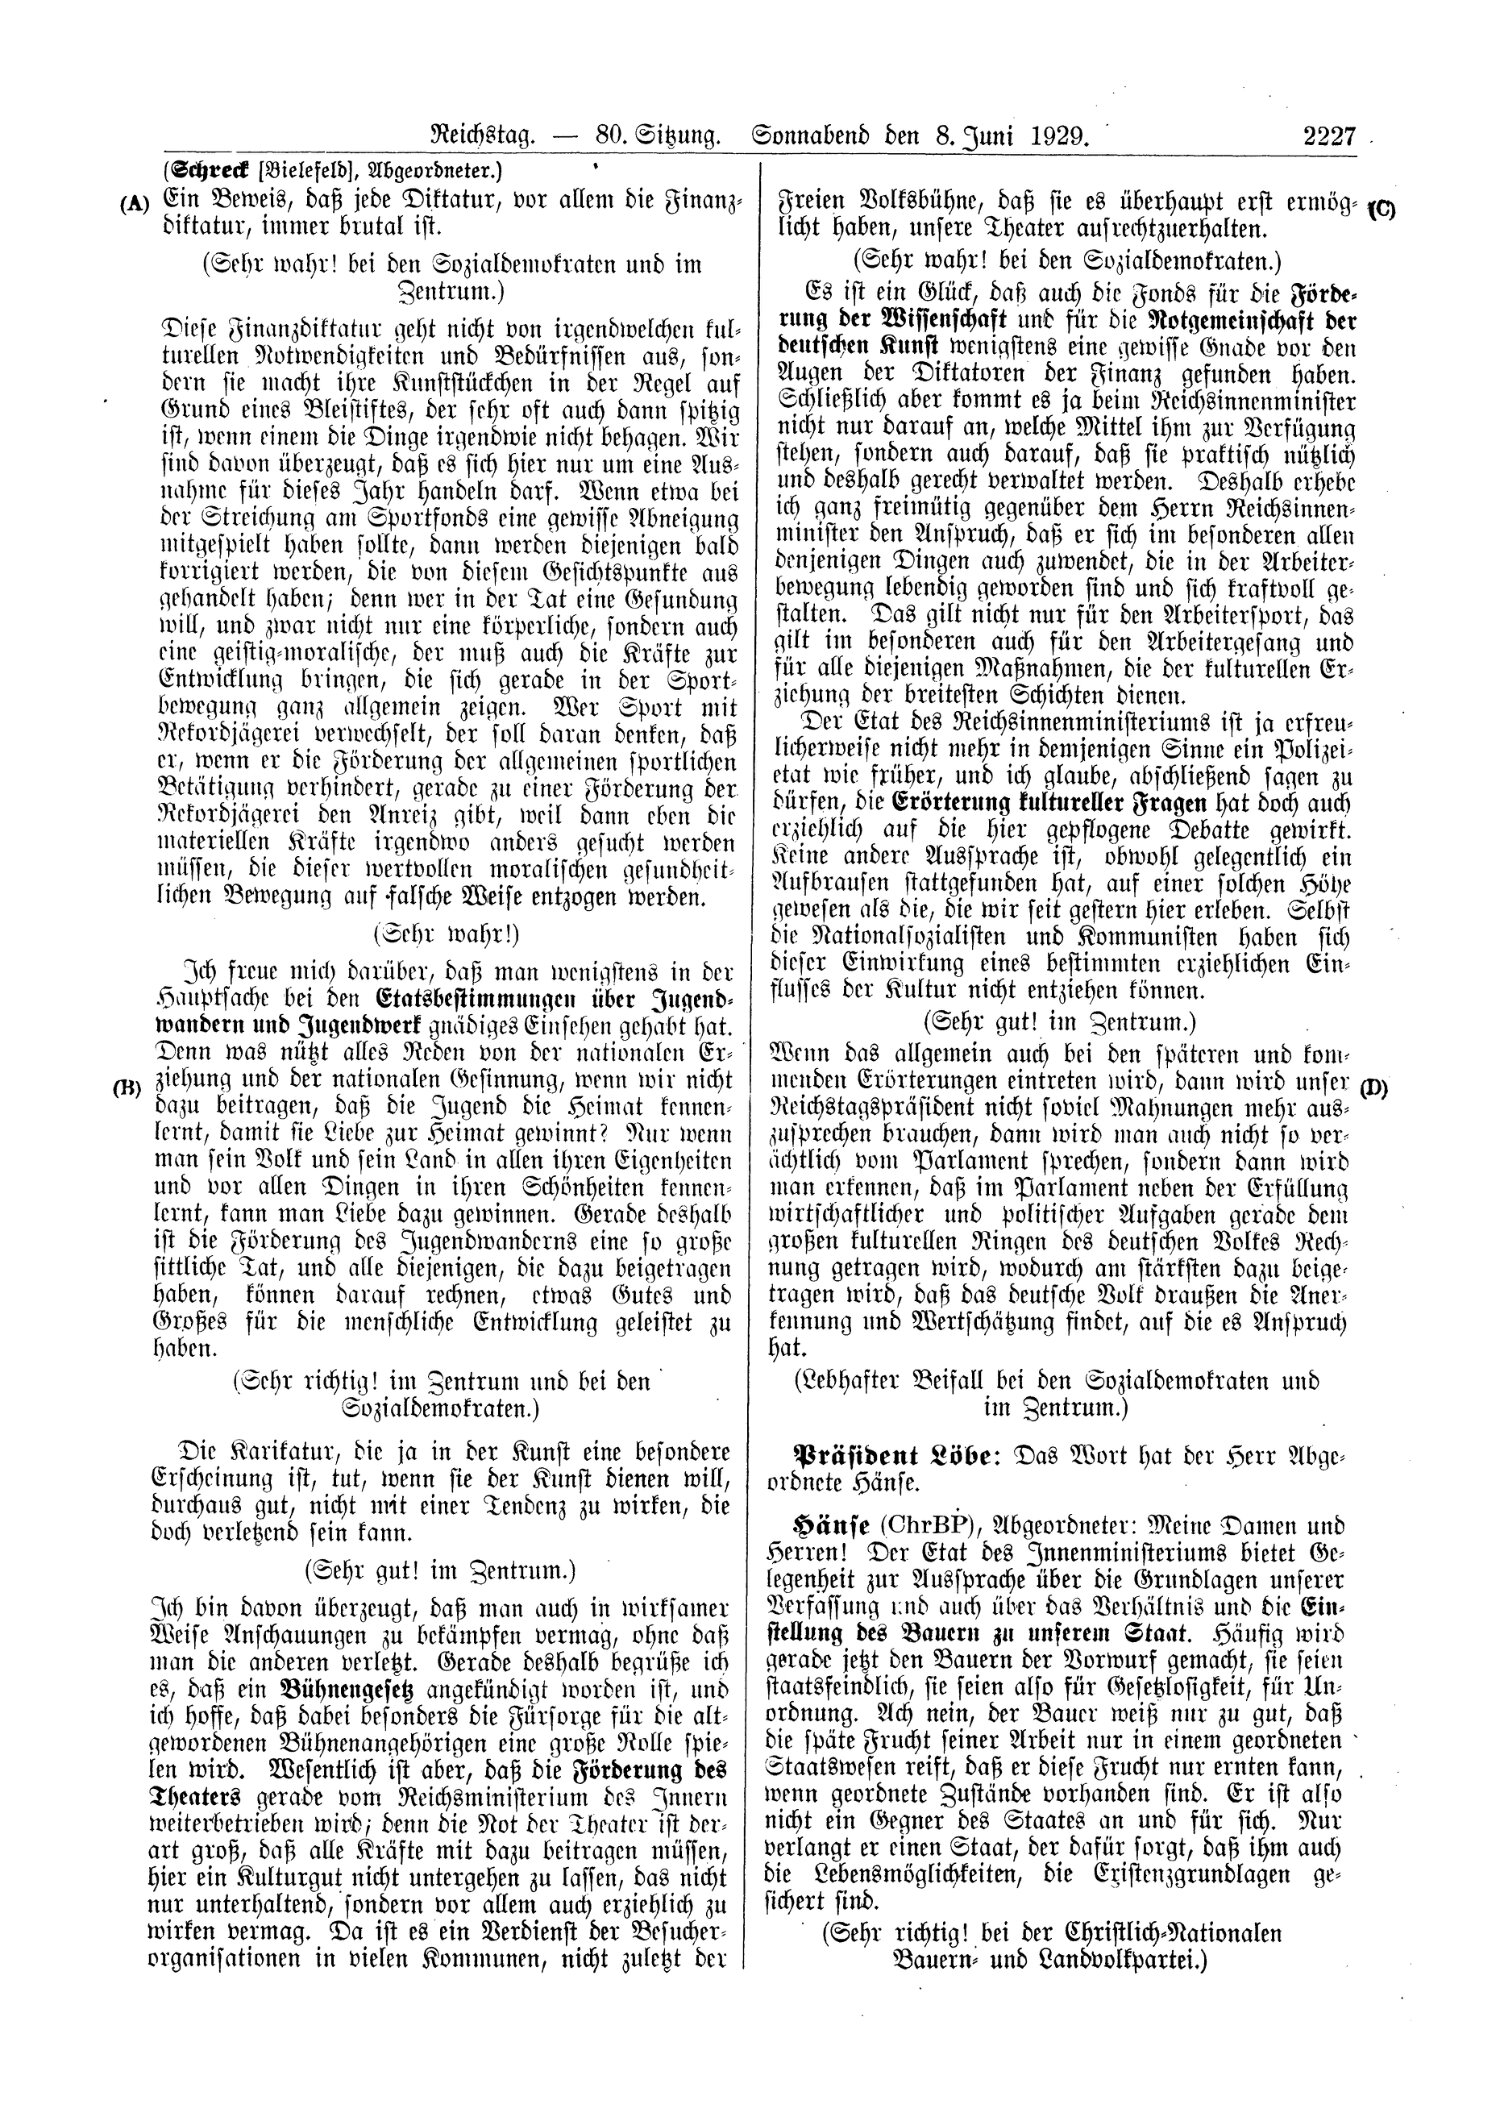 Scan of page 2227